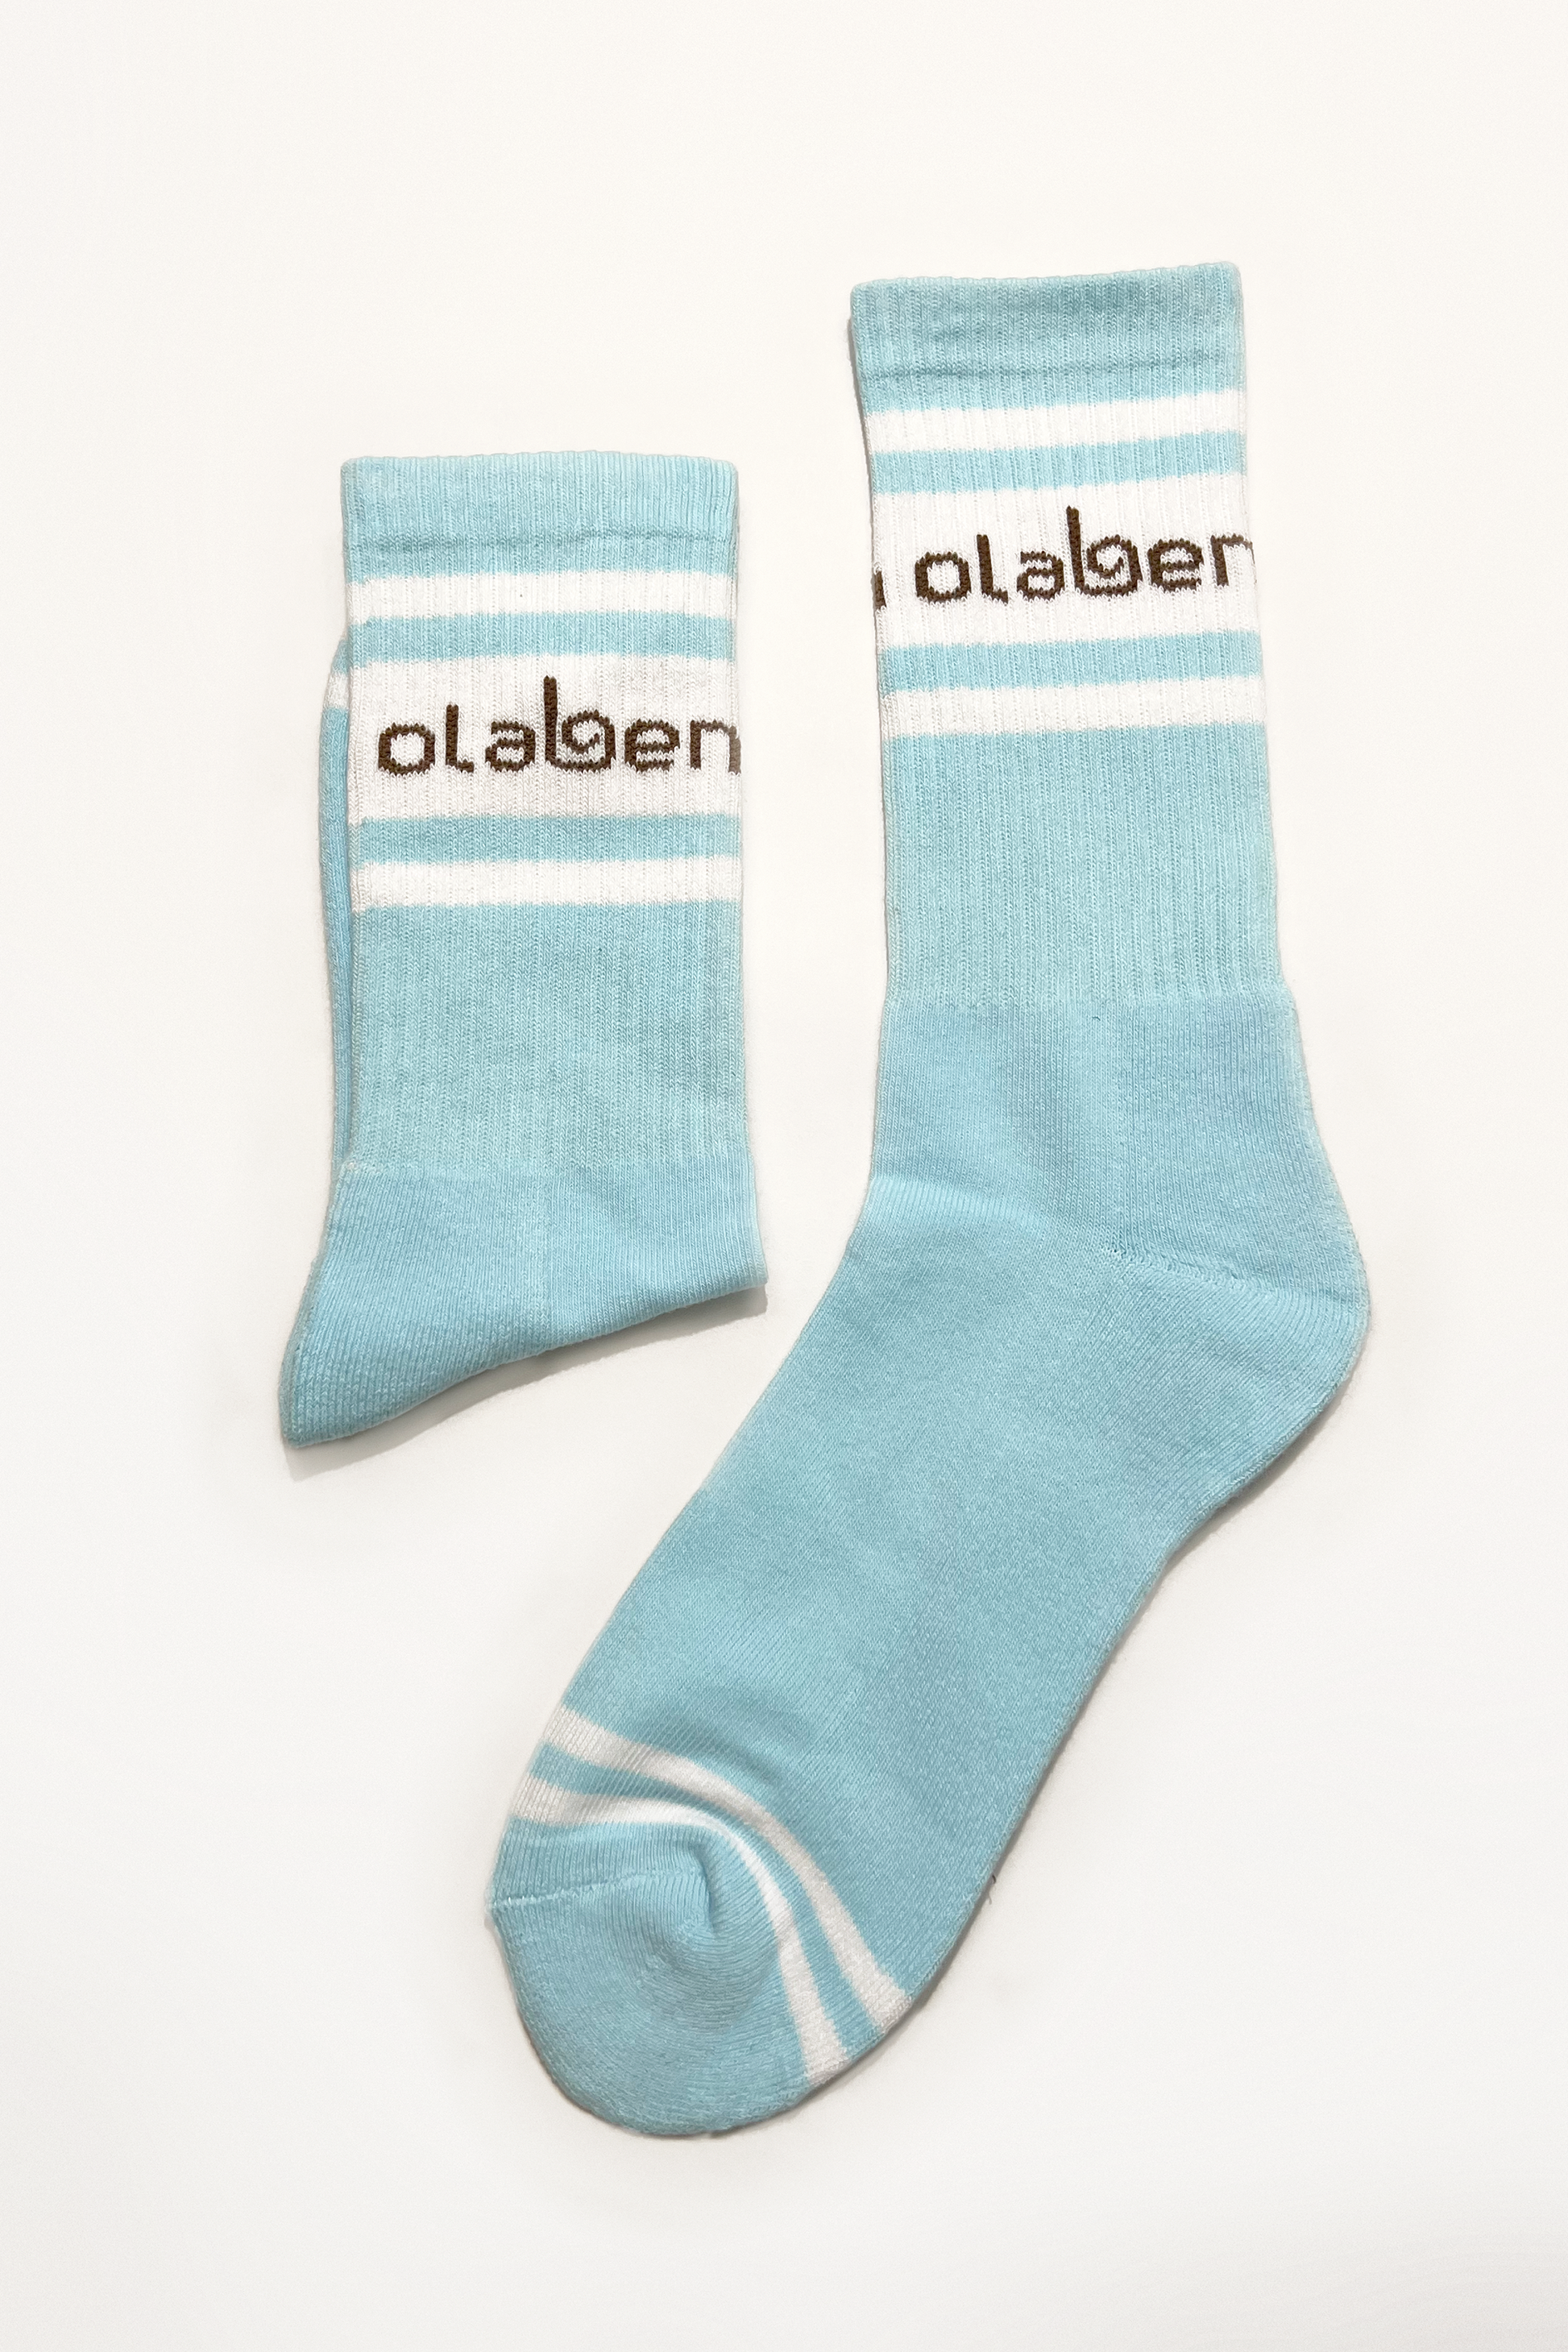 Colorful assortment of cozy quarter socks in ice blue, perfect for cloud-inspired fashion.